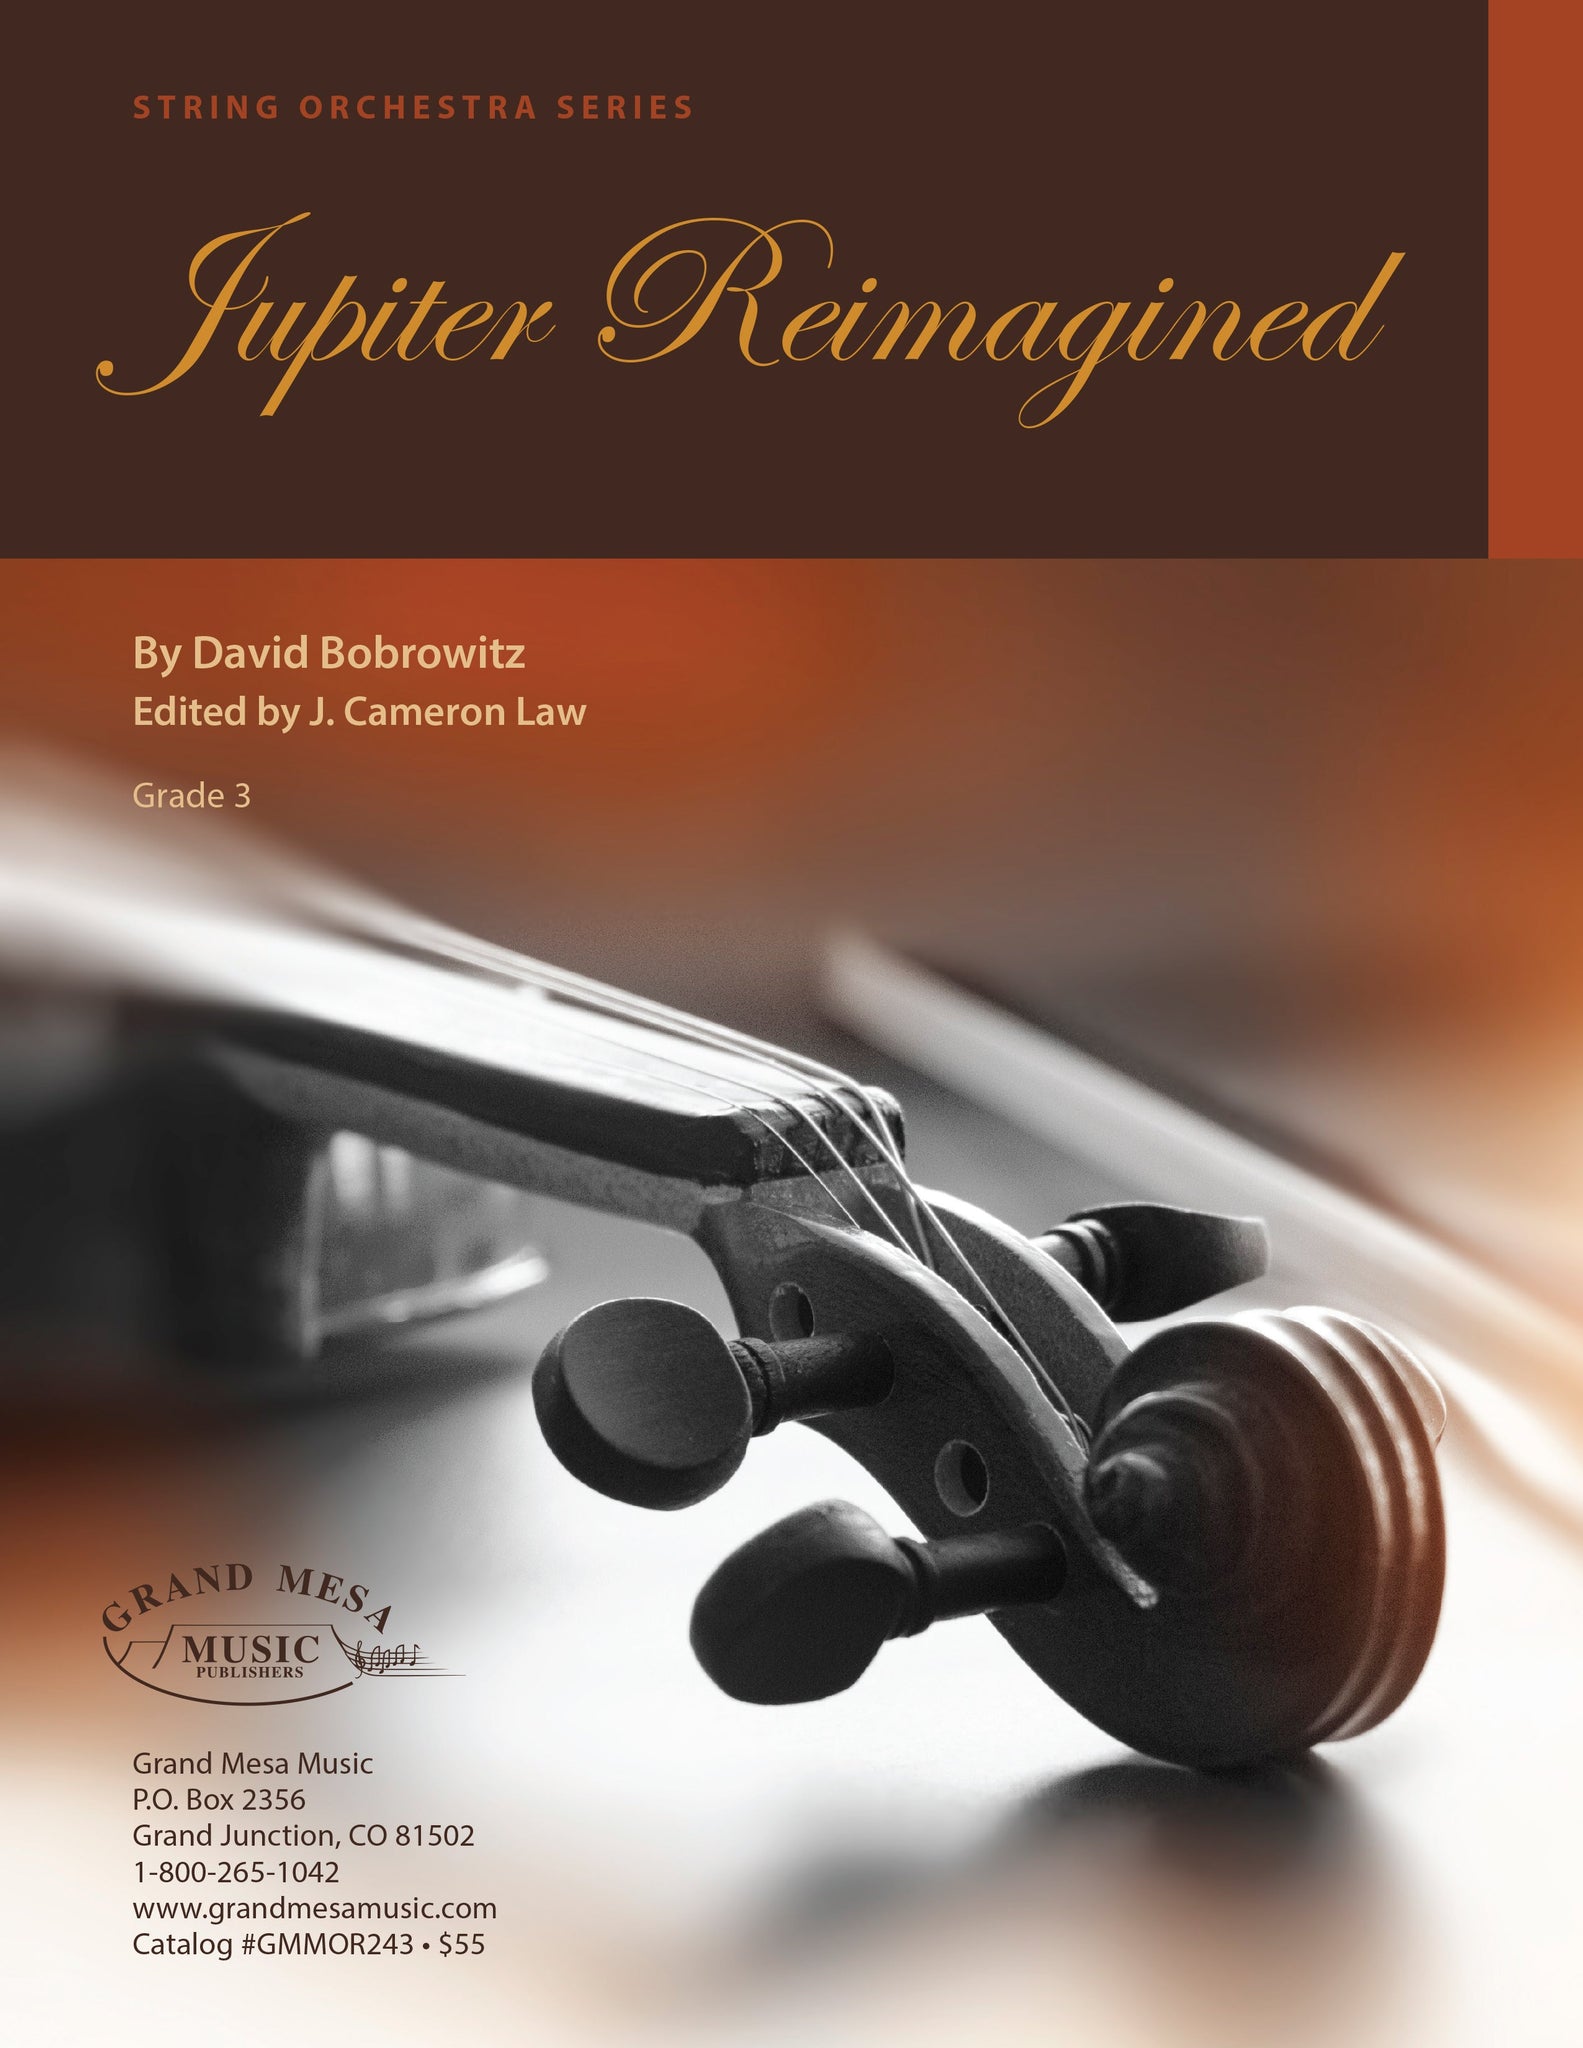 Strings sheet music cover of Jupiter Reimagined, composed by David Bobrowitz.